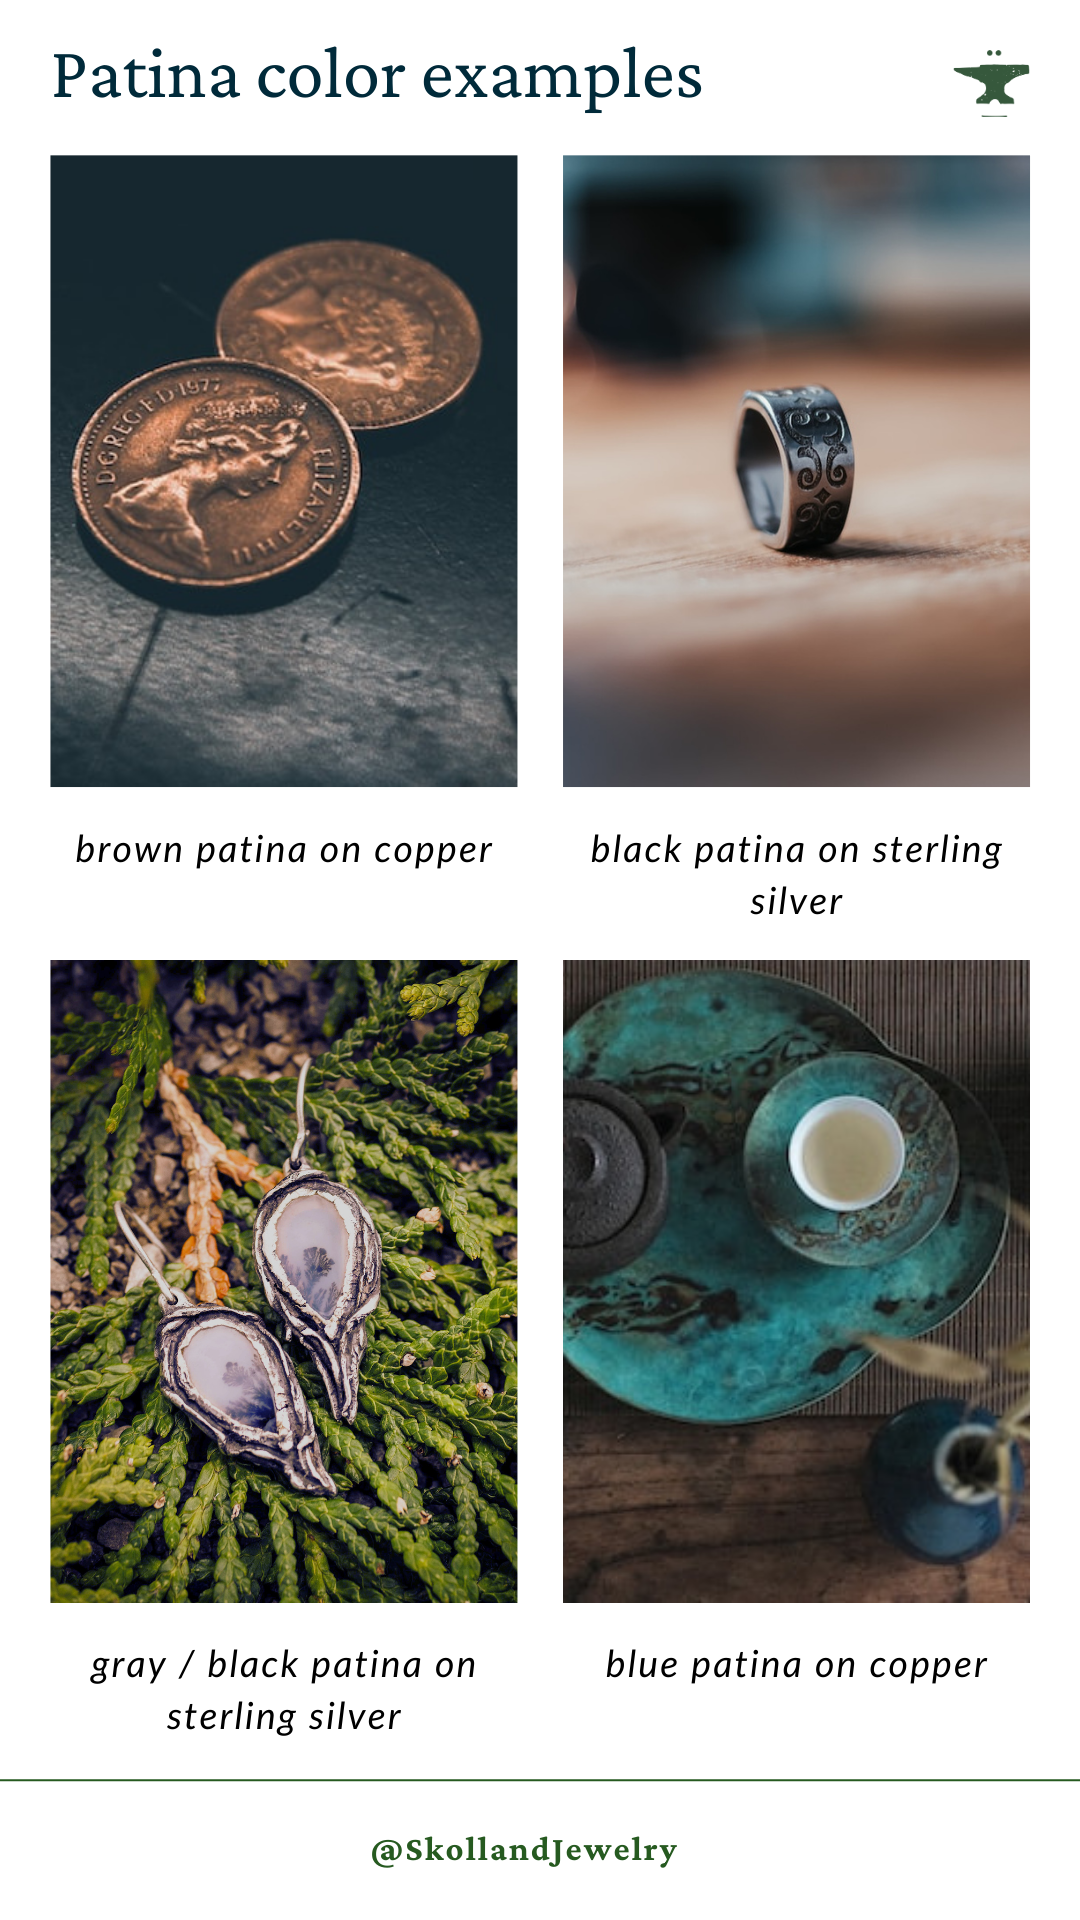 a composite image of 4 different patina examples on silver and copper, composite created by skolland jewelry